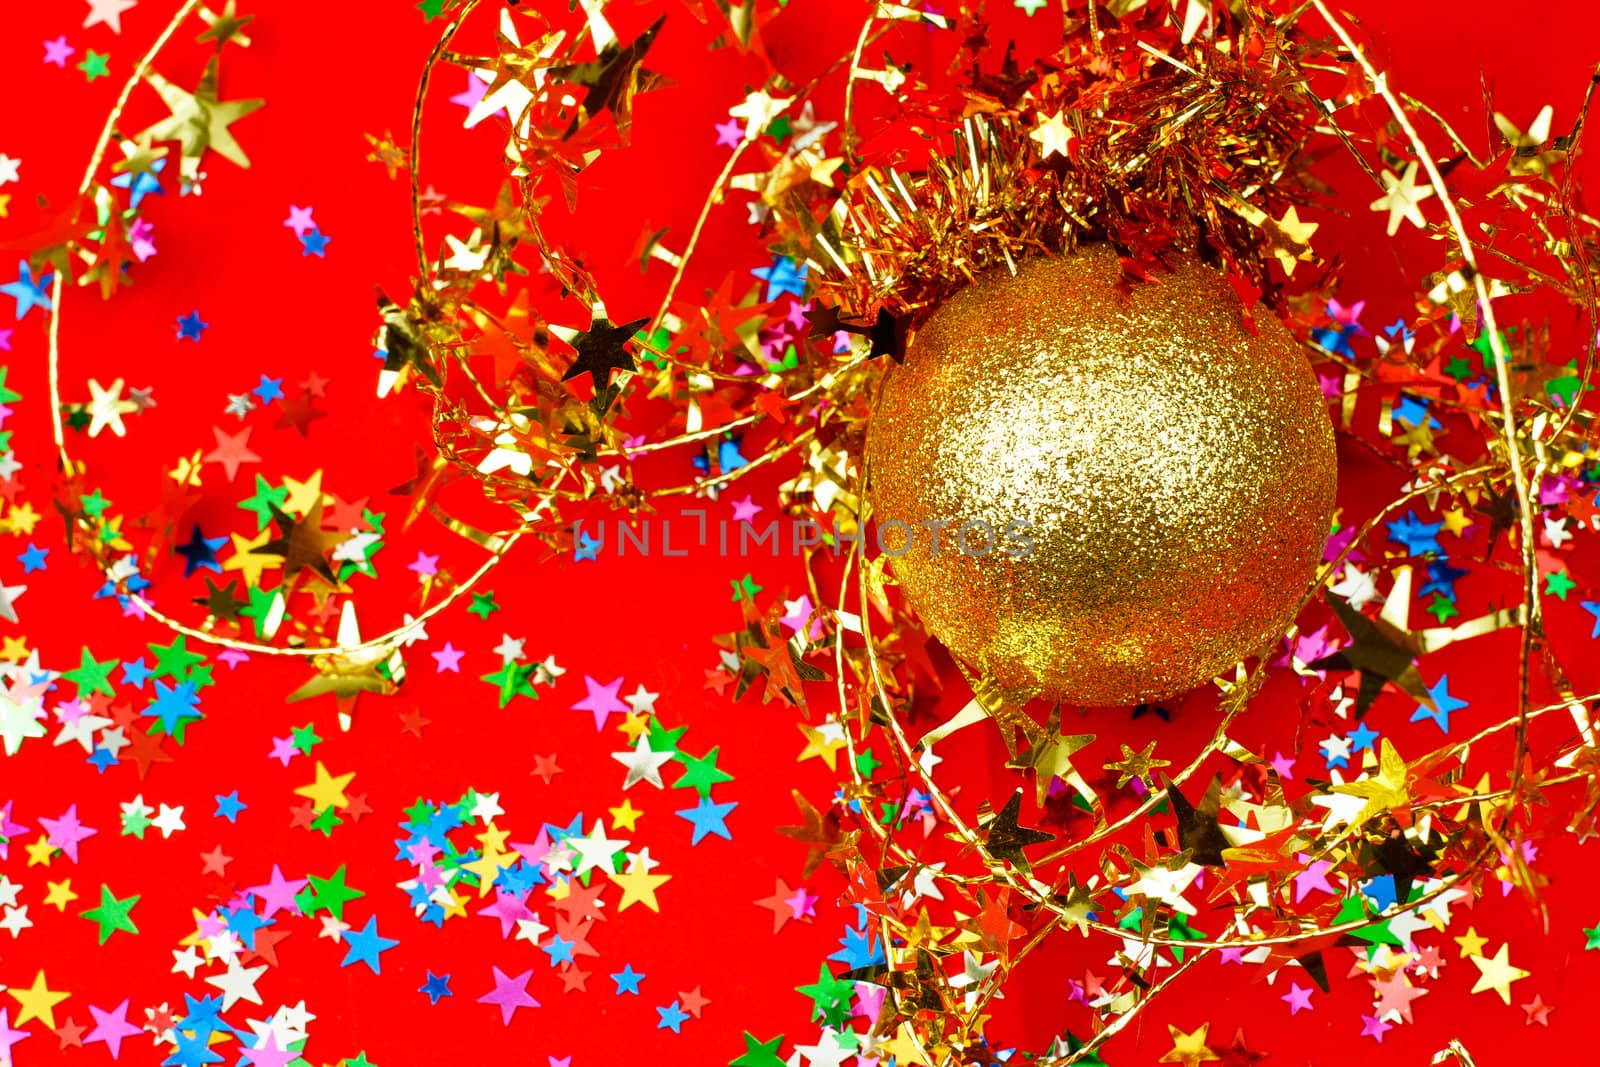 Golden Christmas bauble with star shaped tinsel on red background